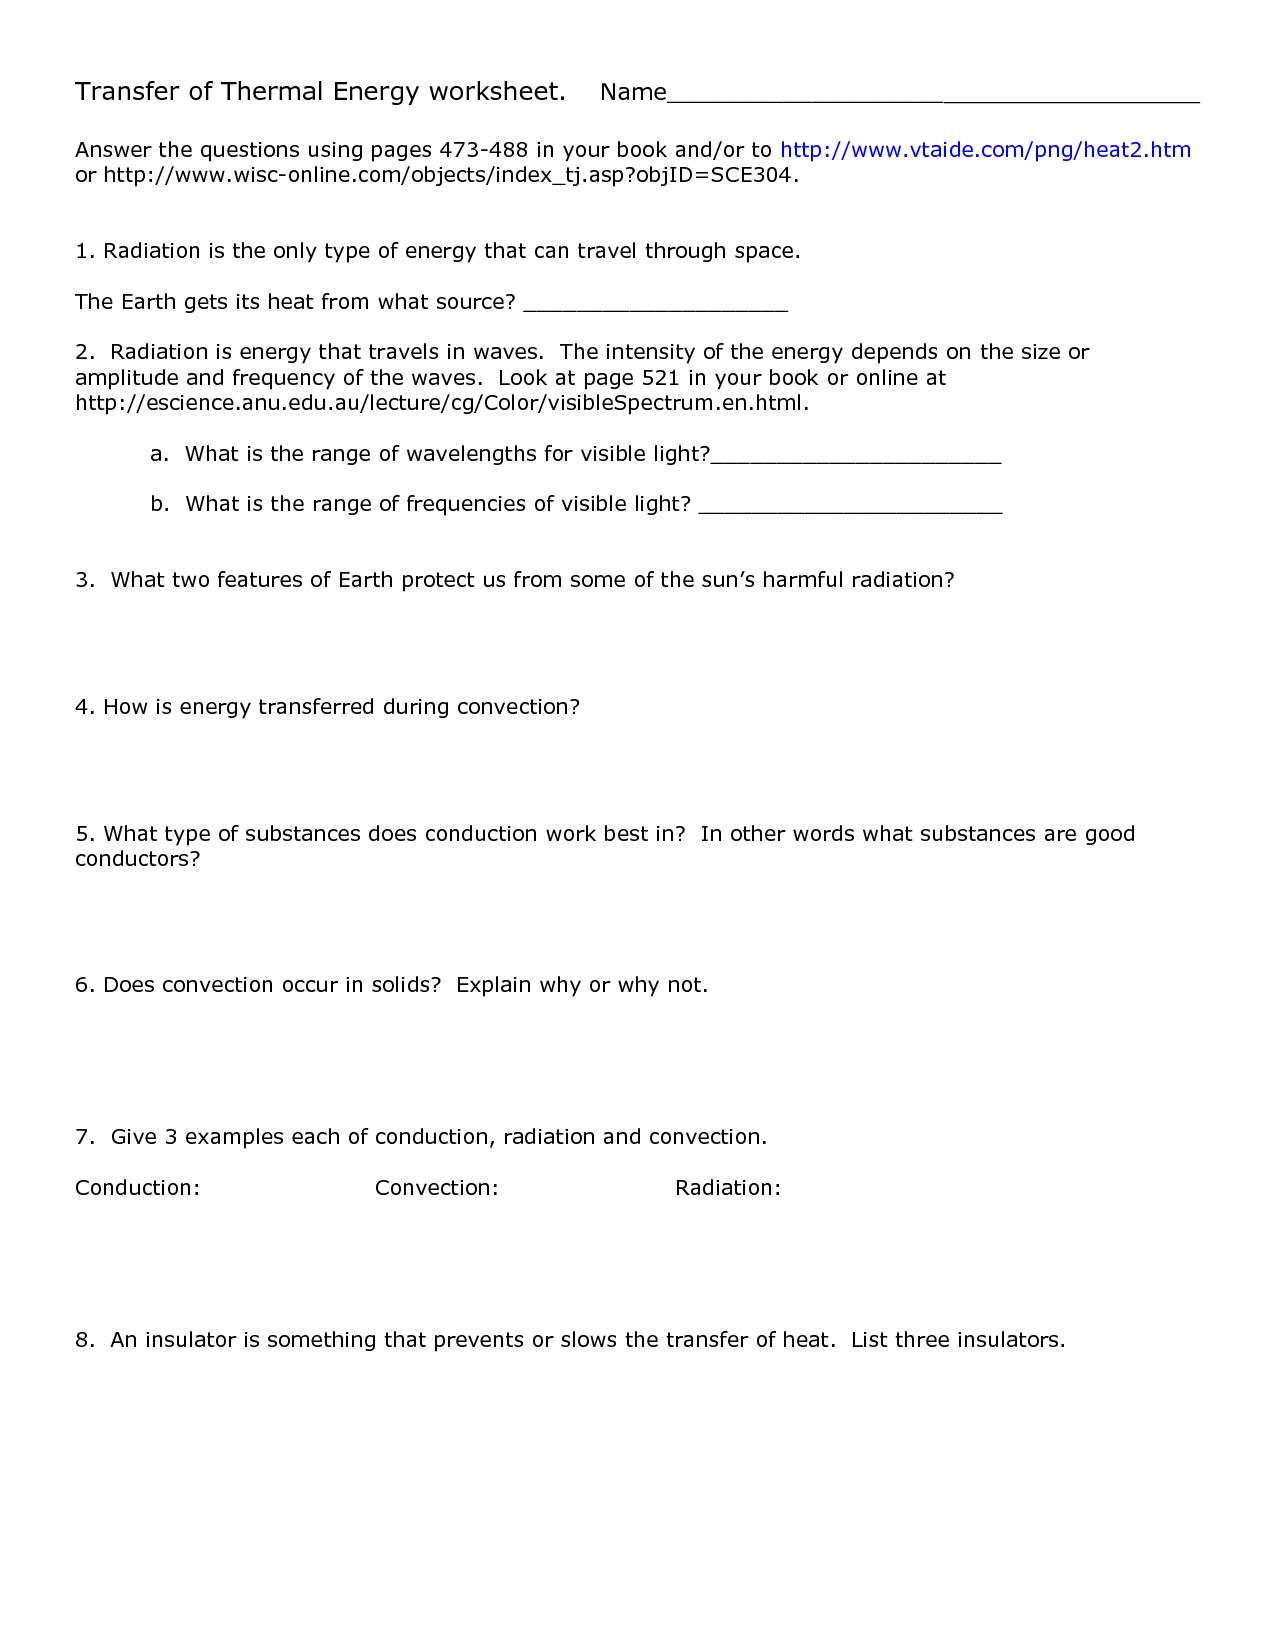 17 Images of Thermal Energy Transfer Worksheet Answers